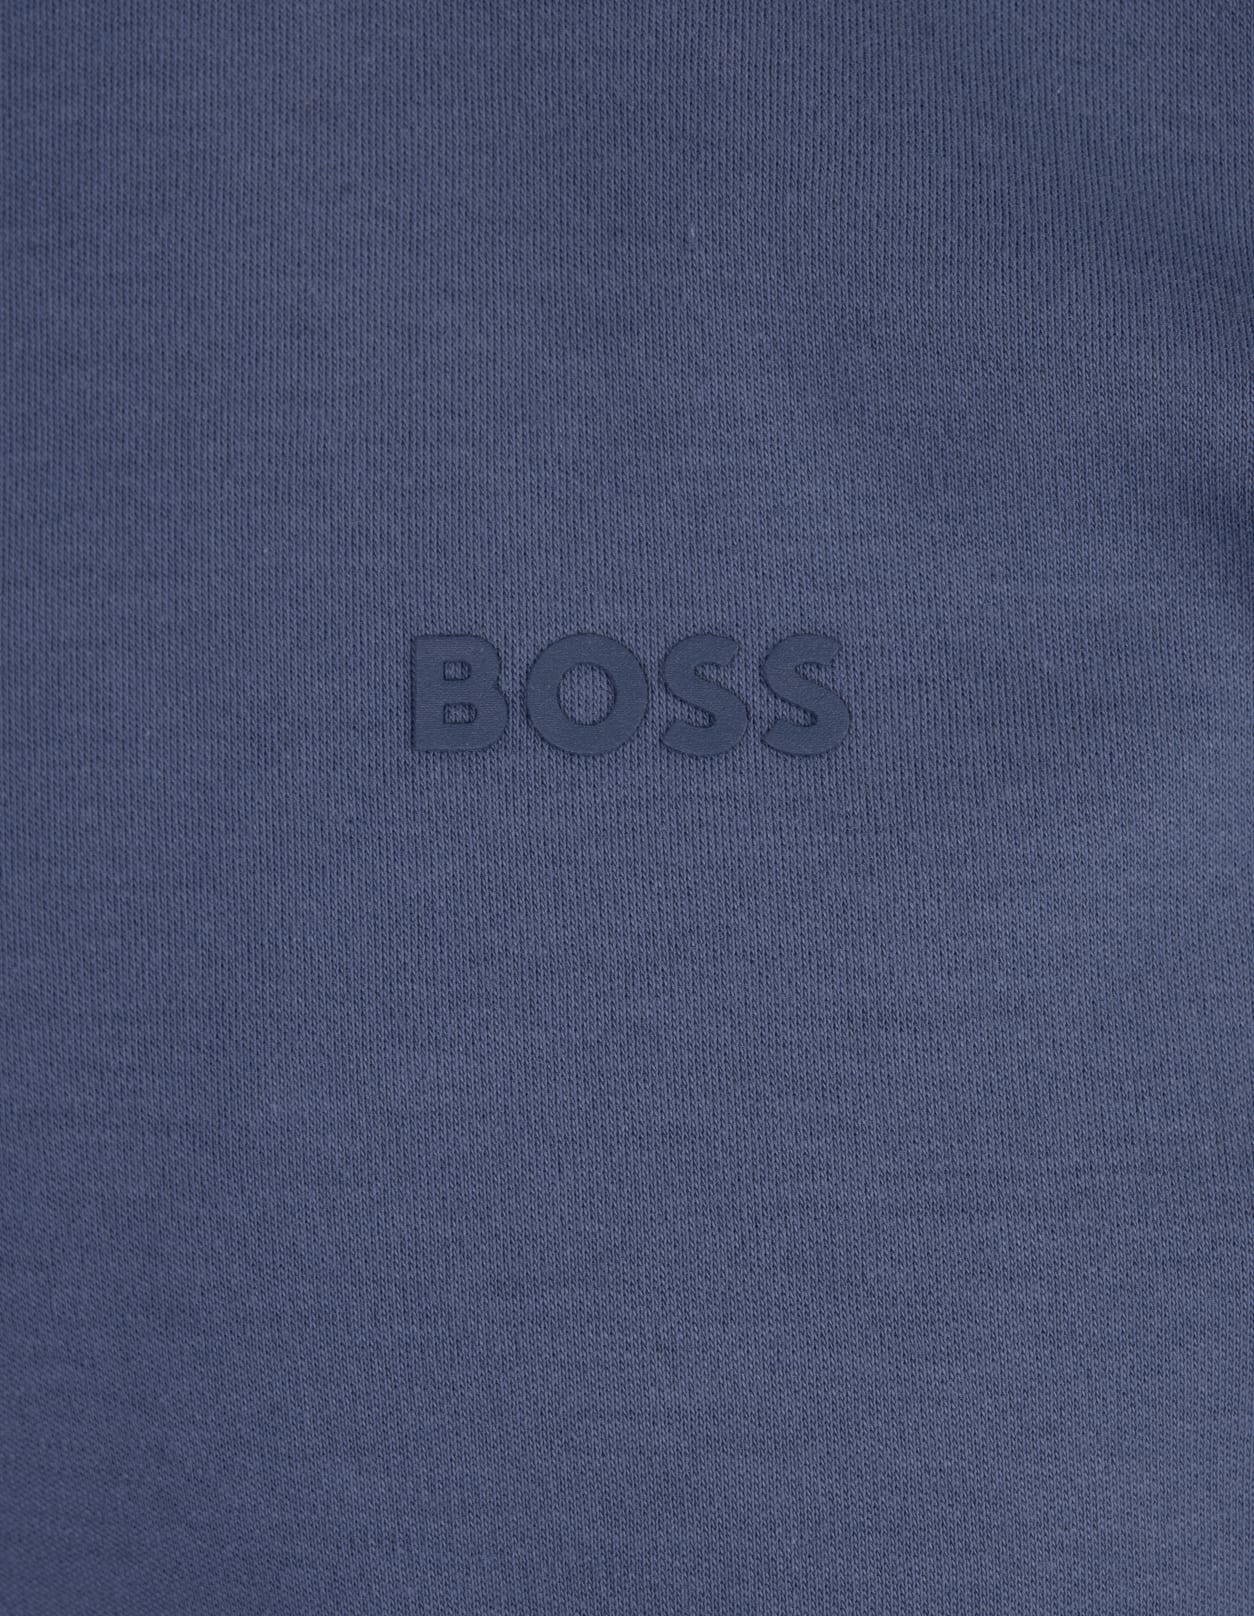 Shop Hugo Boss Cerulean Blue Slim Fit Polo Shirt With Striped Collar